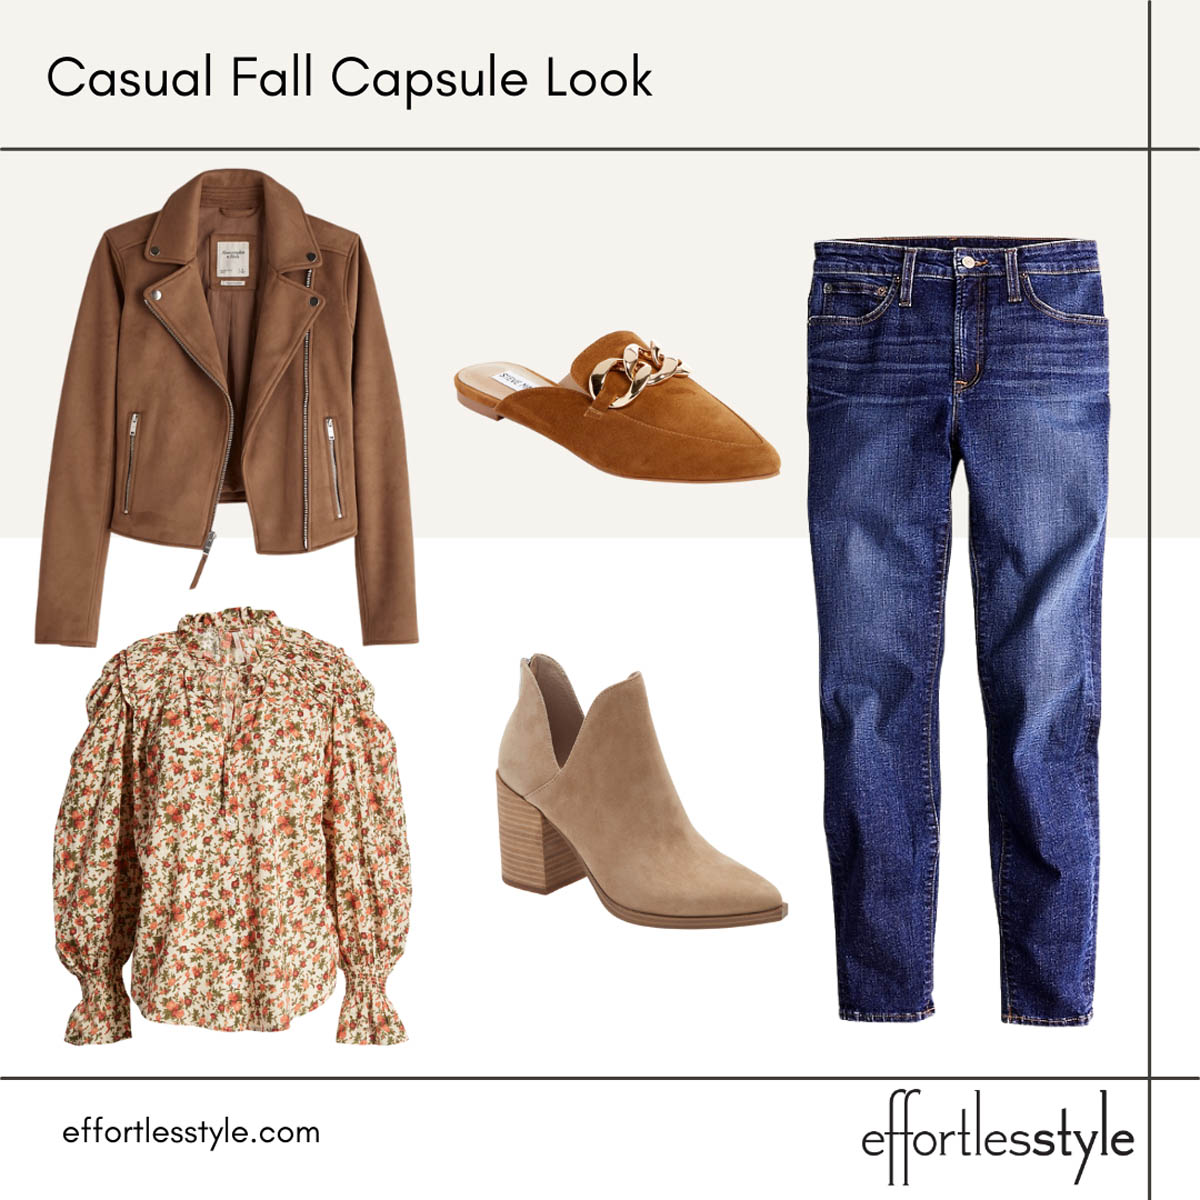 Fall Capsule Wardrobe Looks Suede Moto Jacket and Floral Blouse Outfit